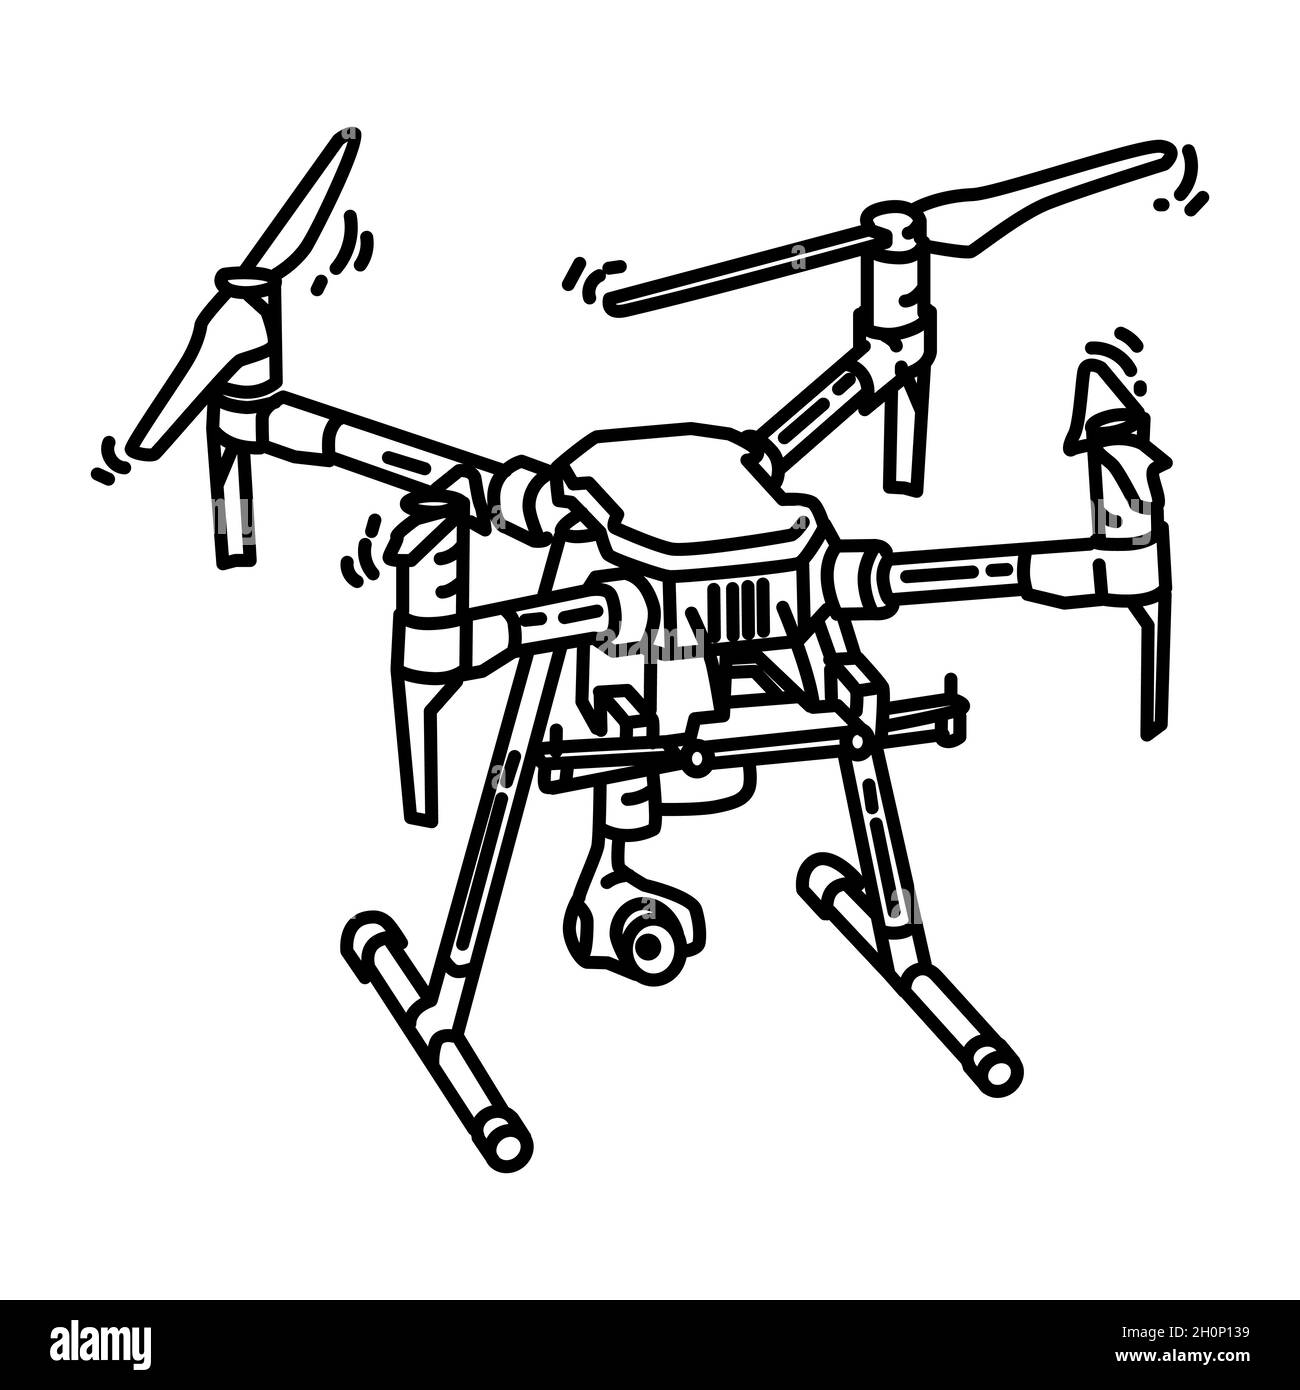 Drones Part of Police Equipment and Accessories Hand Drawn Icon Set Vector. Stock Vector